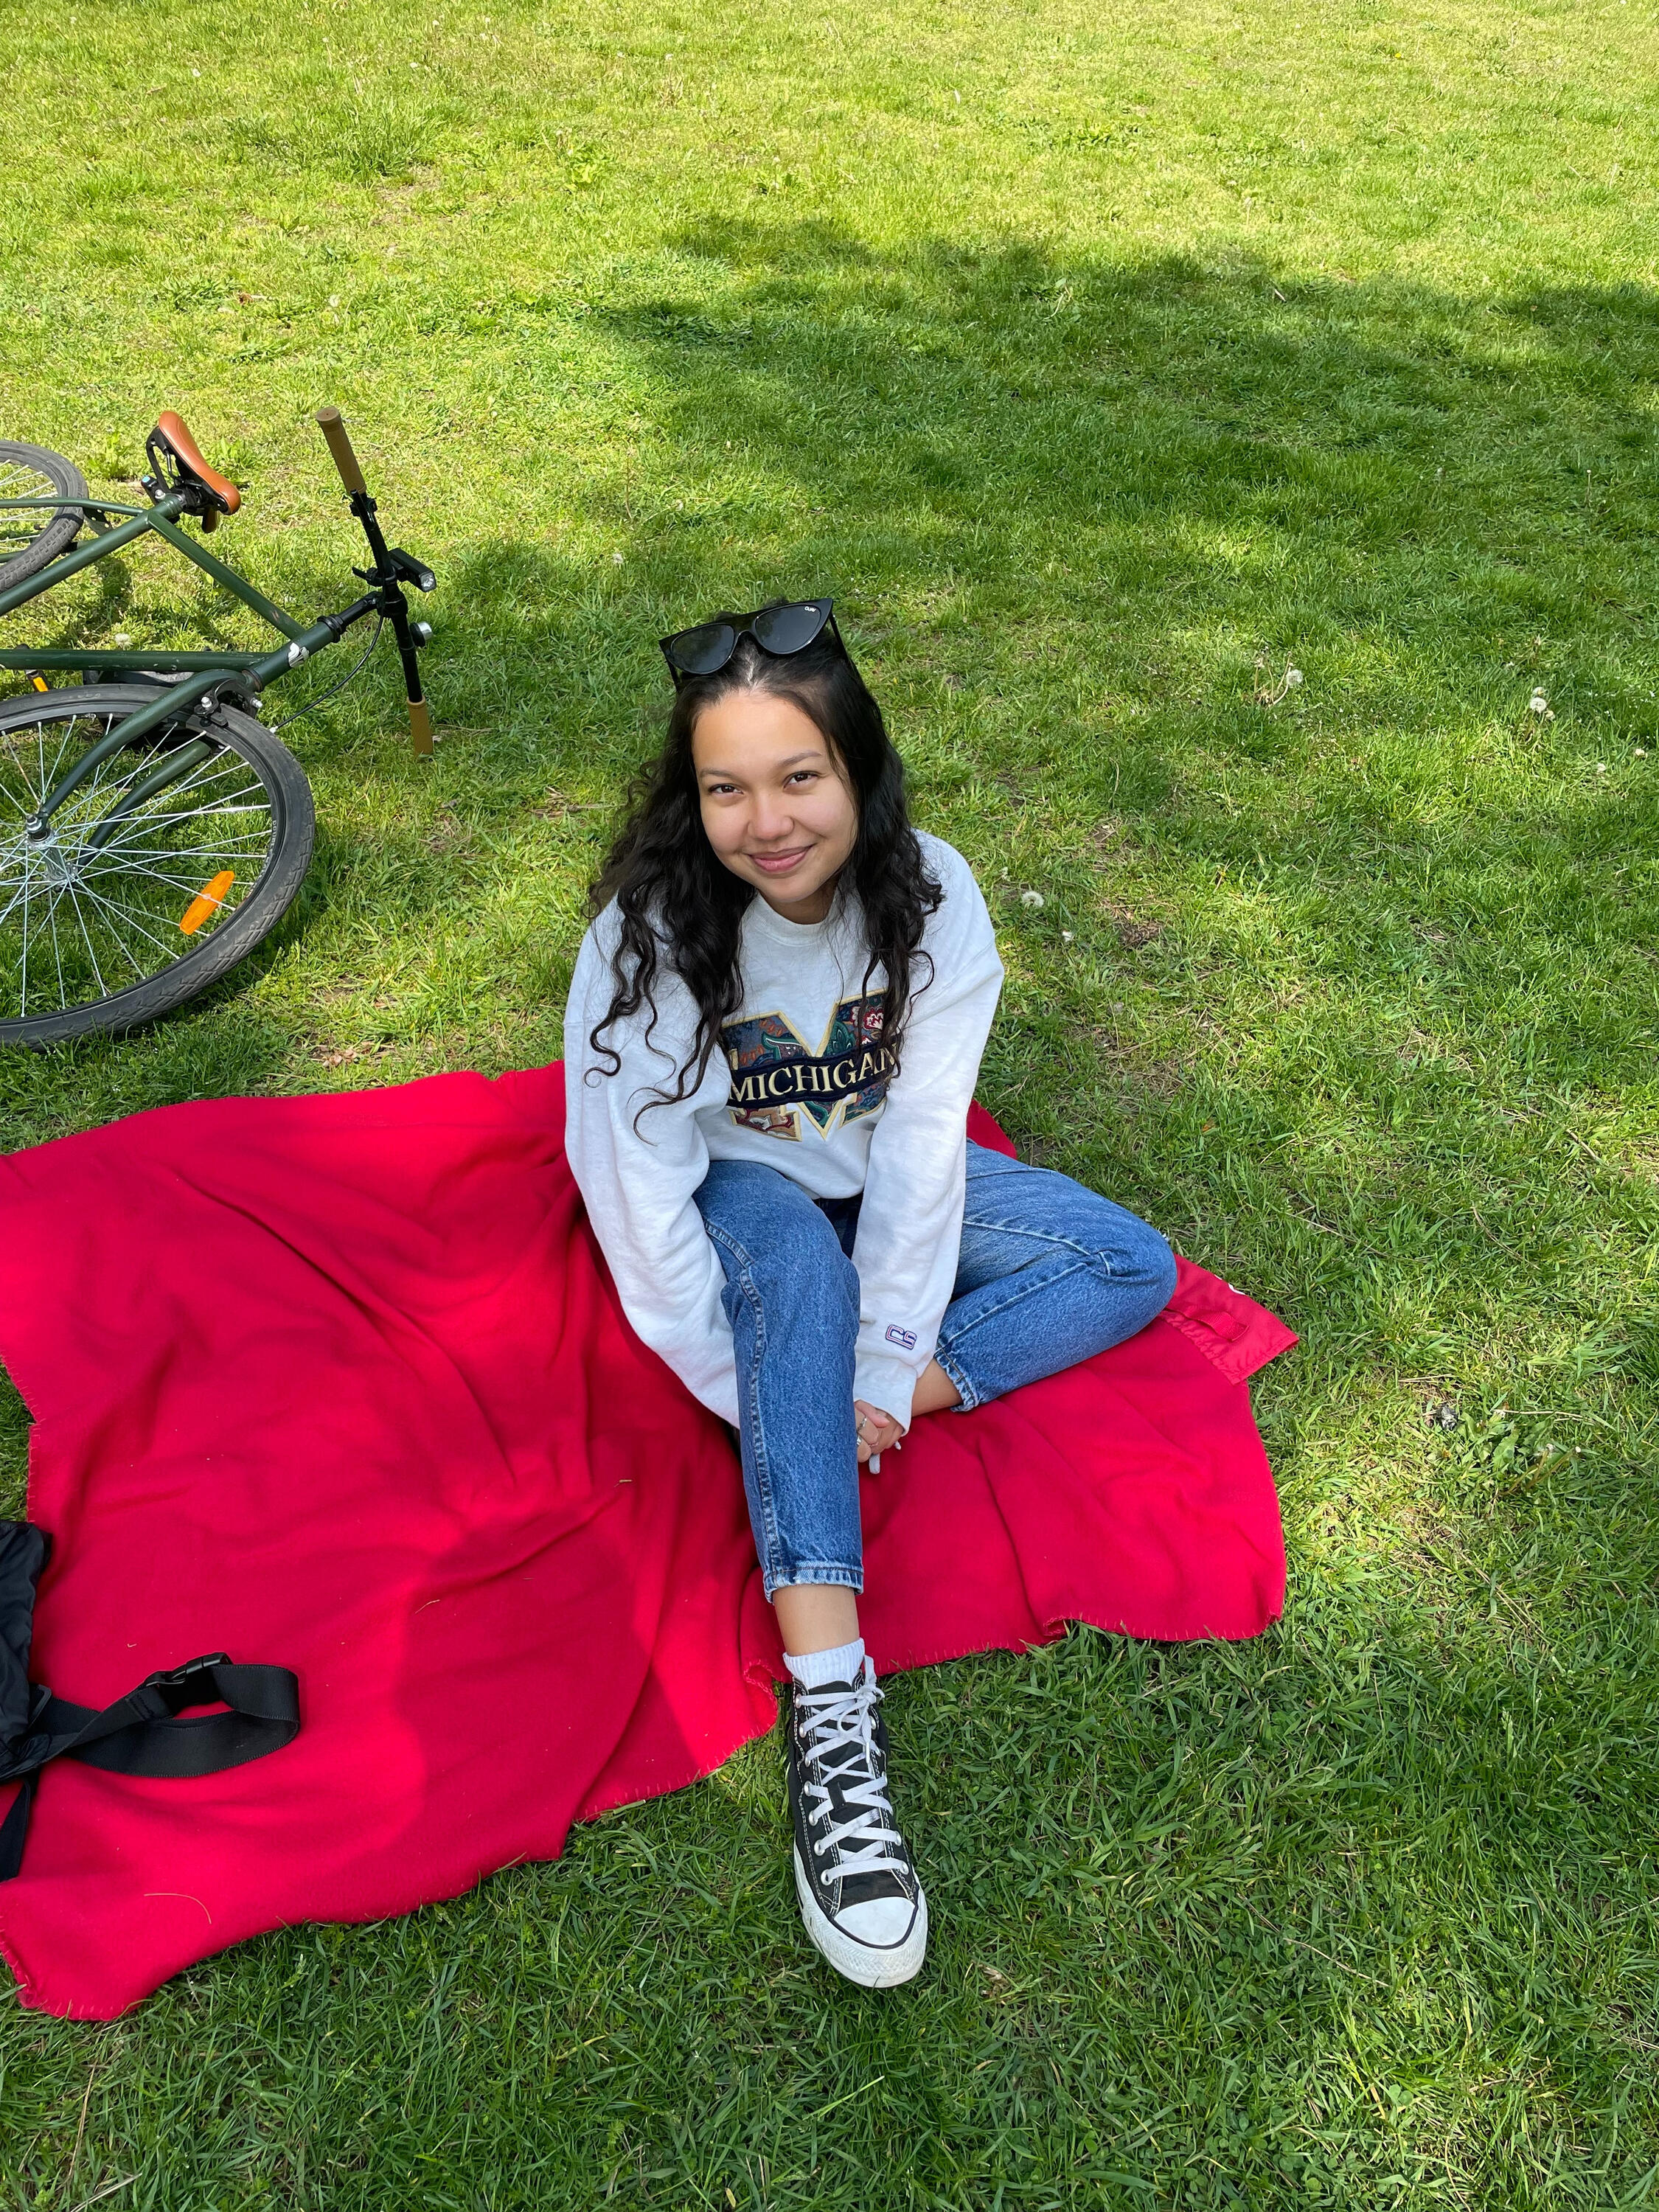 Putri sitting down on a picnic blanket in the grass. 